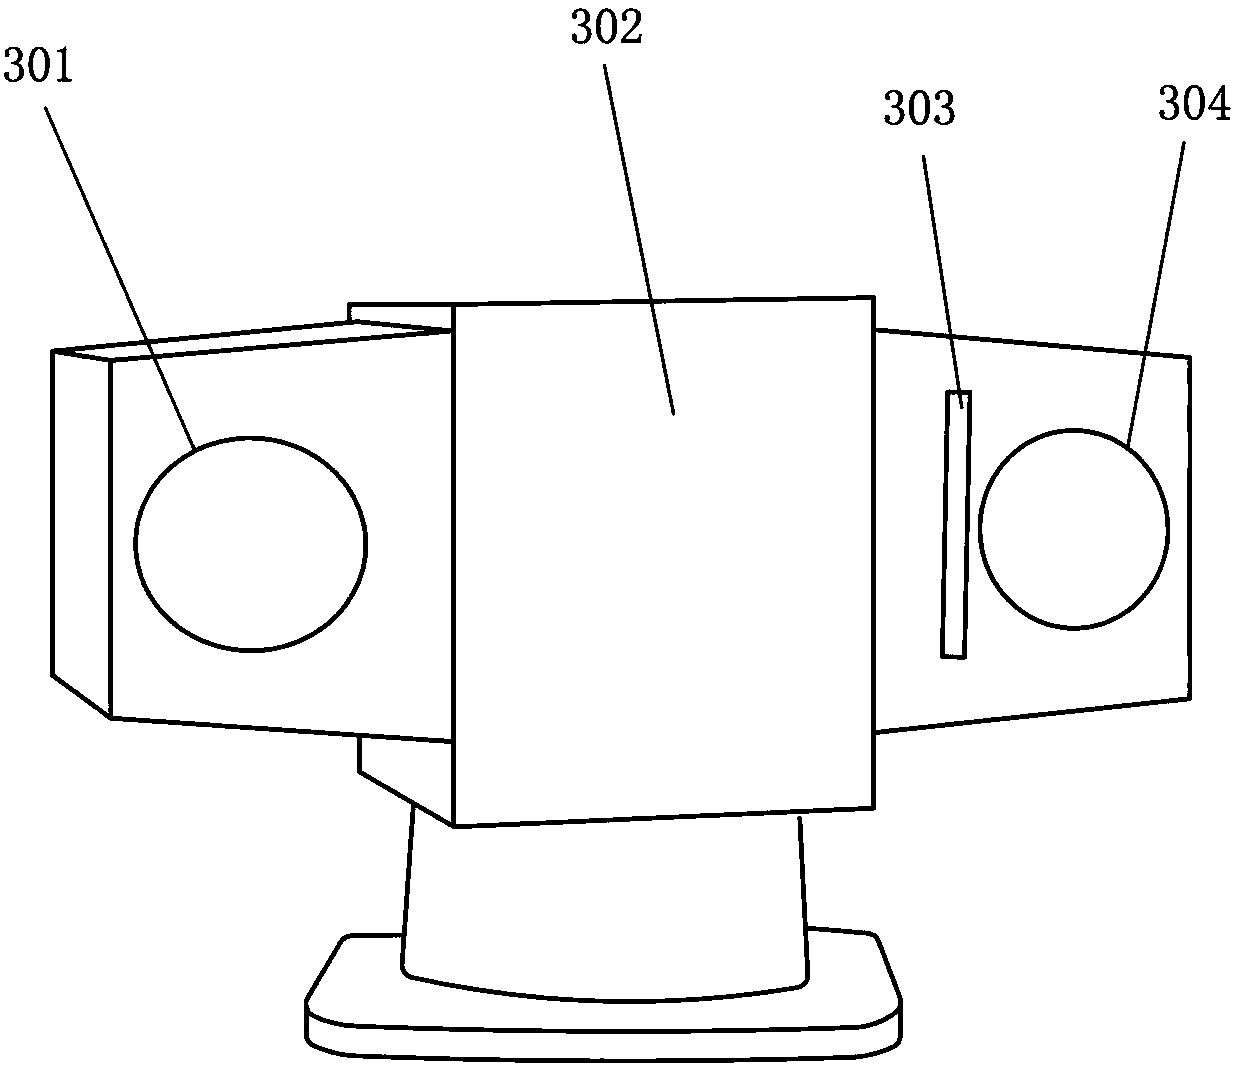 Equipment and method for monitoring blades of wind turbine generator set